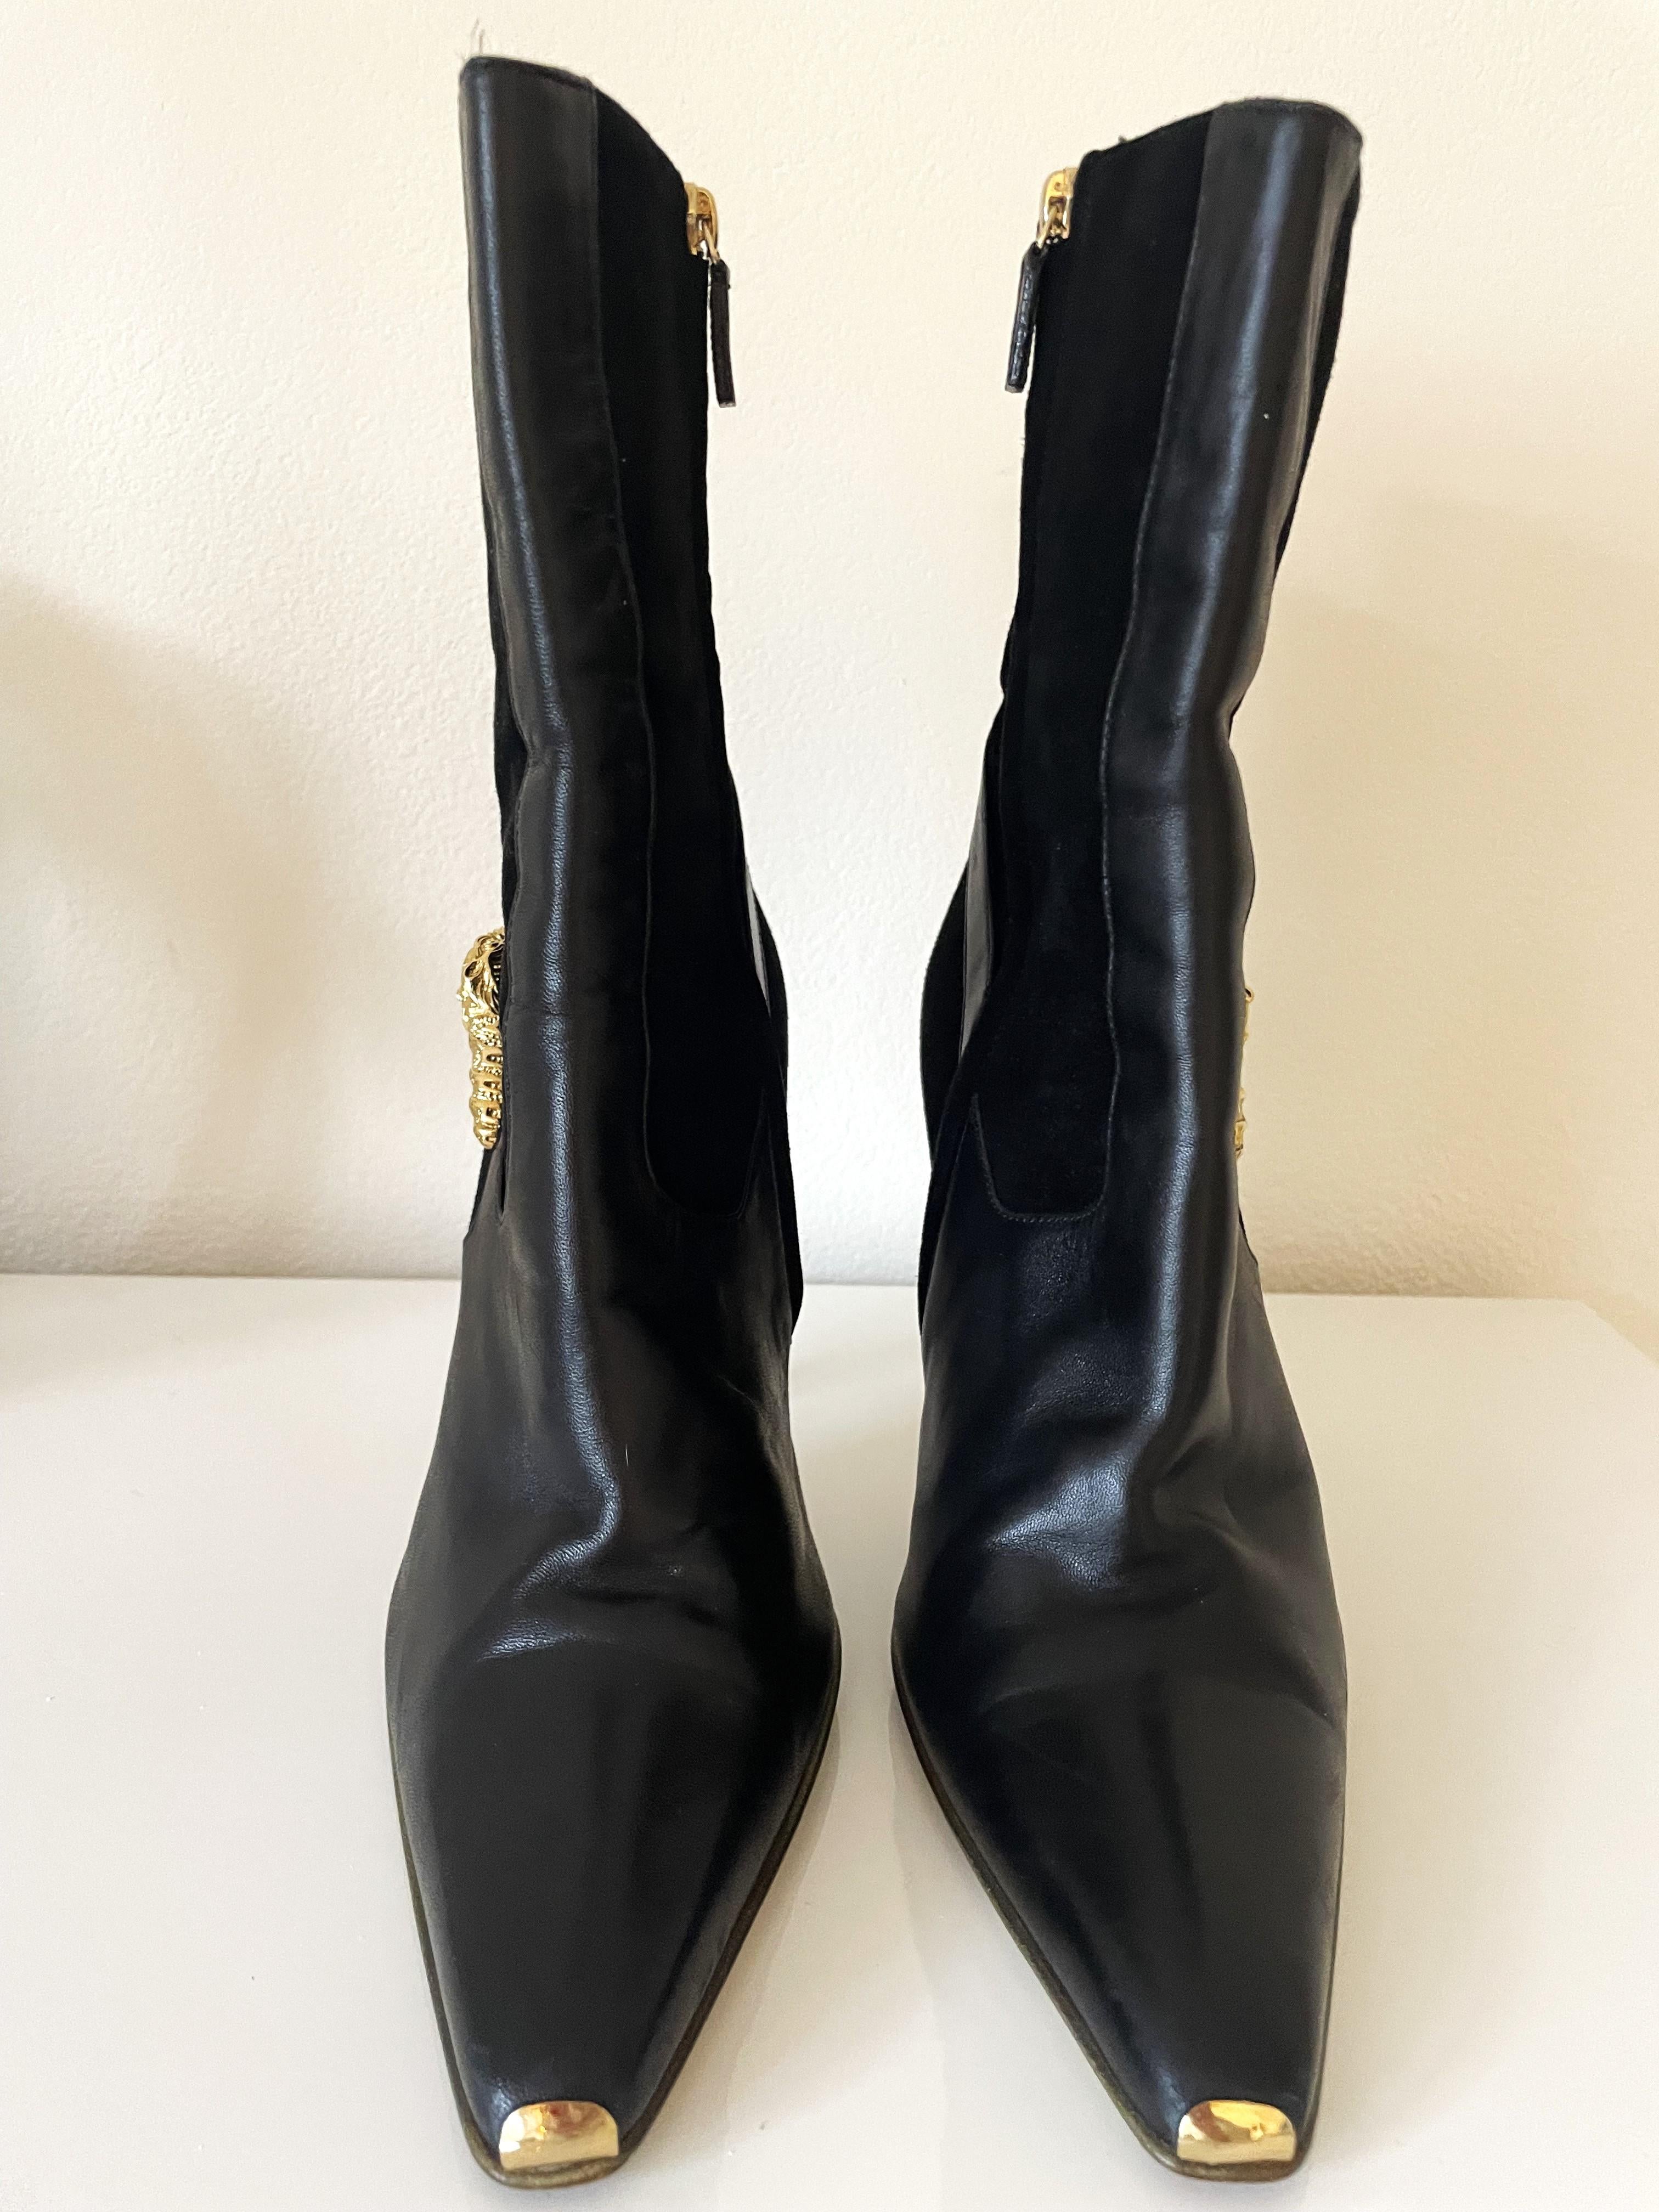 Very rare stunning and eyecathing Gucci high heel ankle boots with a gold metal panther. These were worn by modelling and is one-of-a kind special item from the 90s. Heels are 11 cm. 

Gucci is a renowned Italian luxury fashion brand known for its